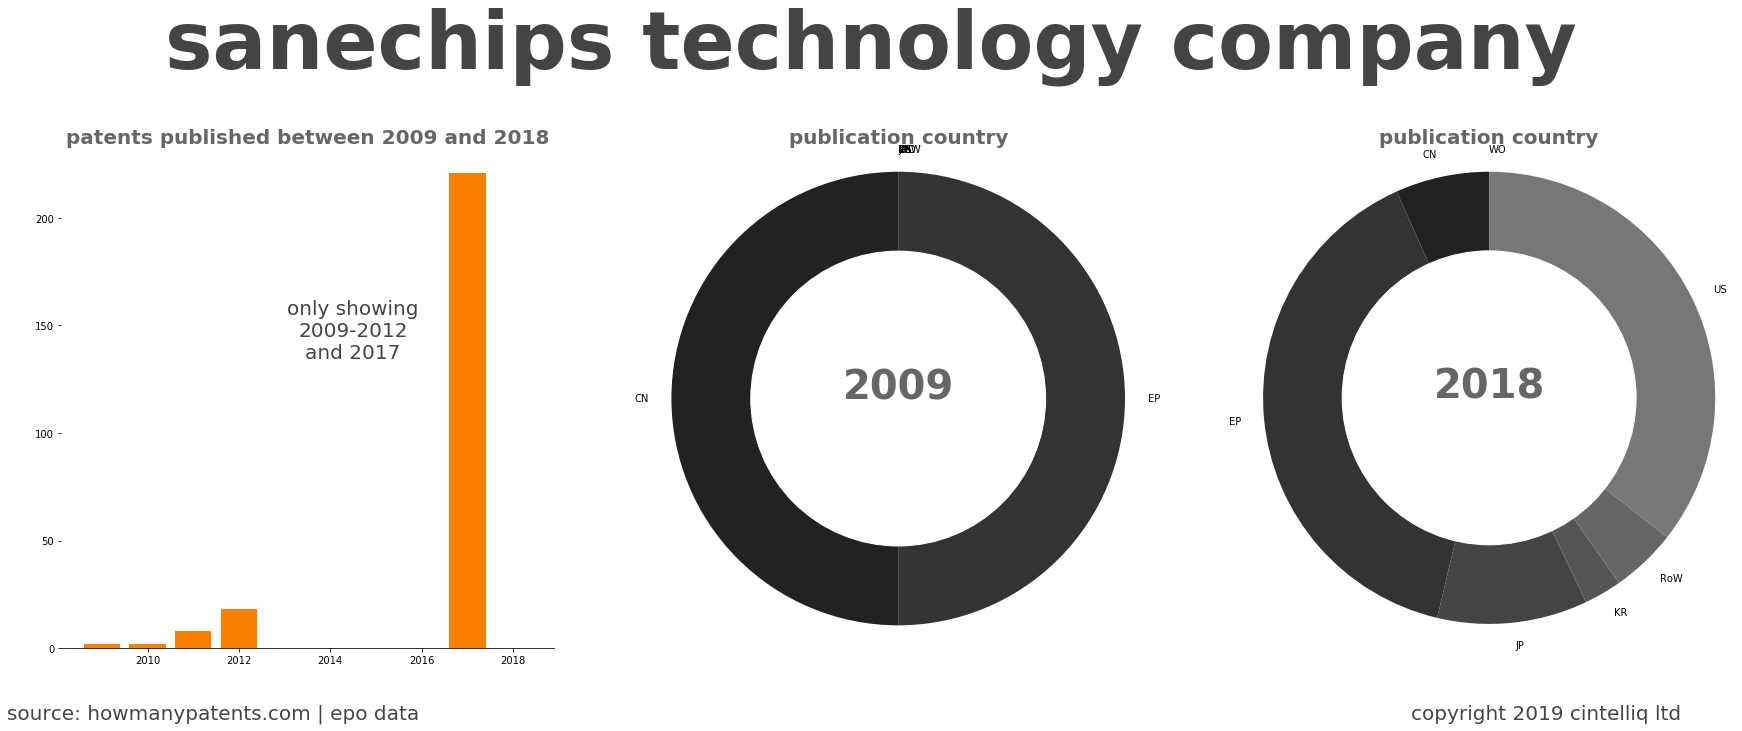 summary of patents for Sanechips Technology Company